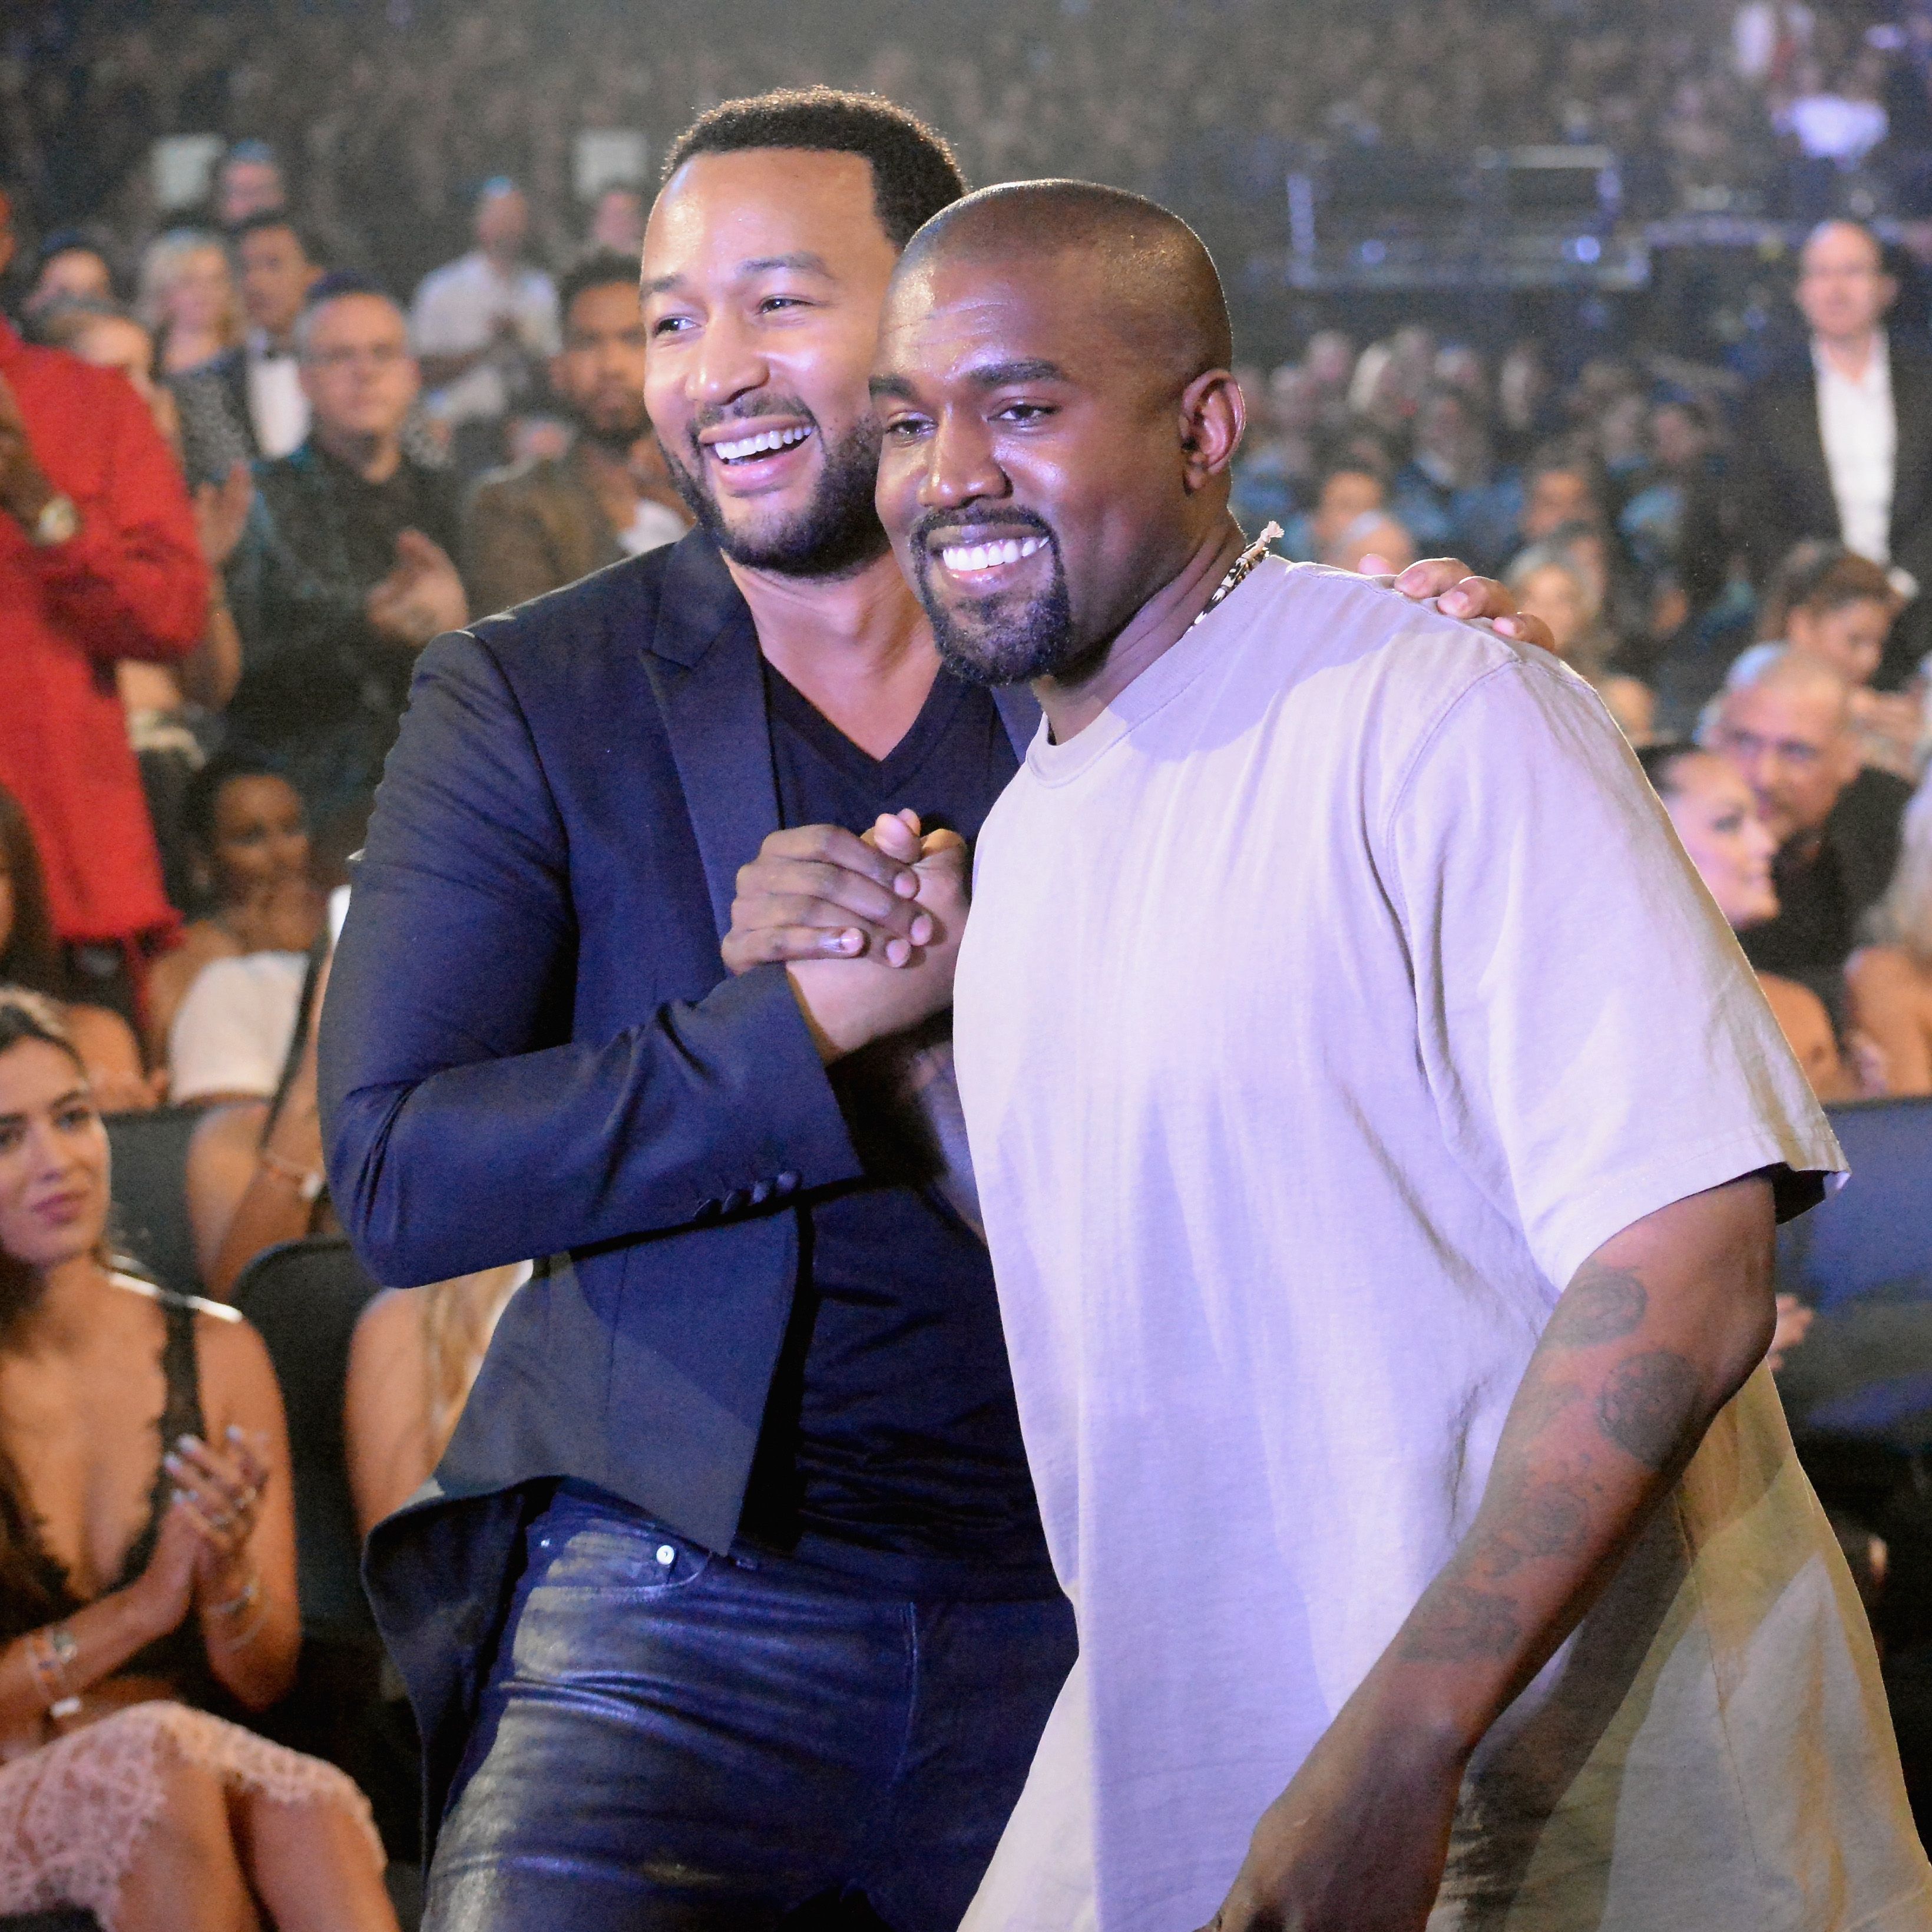 John Legend Candidly Explained Why His Friendship with Kanye West Ended